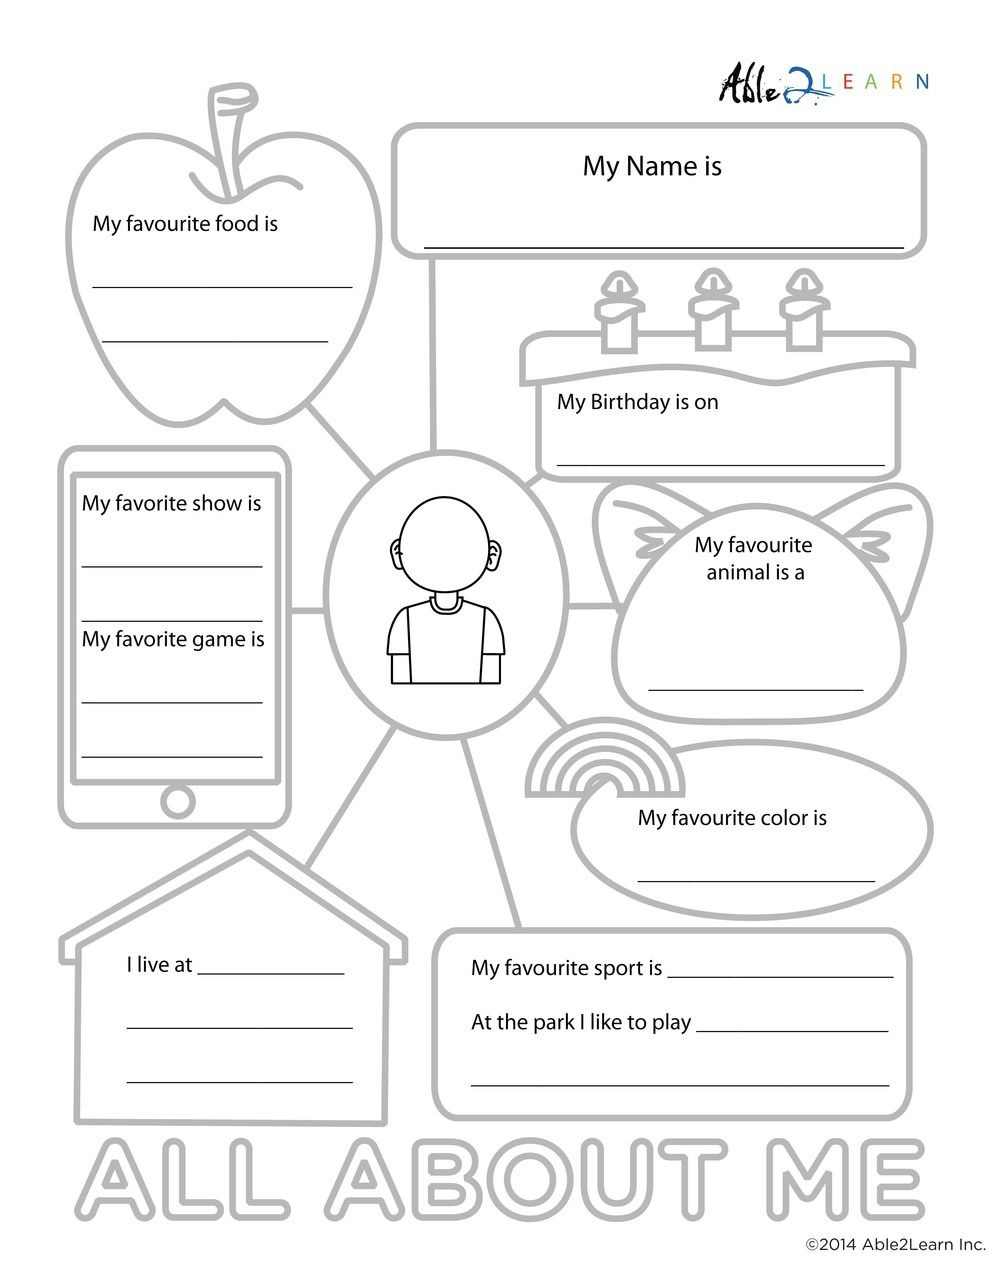 all-about-me-therapy-worksheet-all-about-me-worksheets